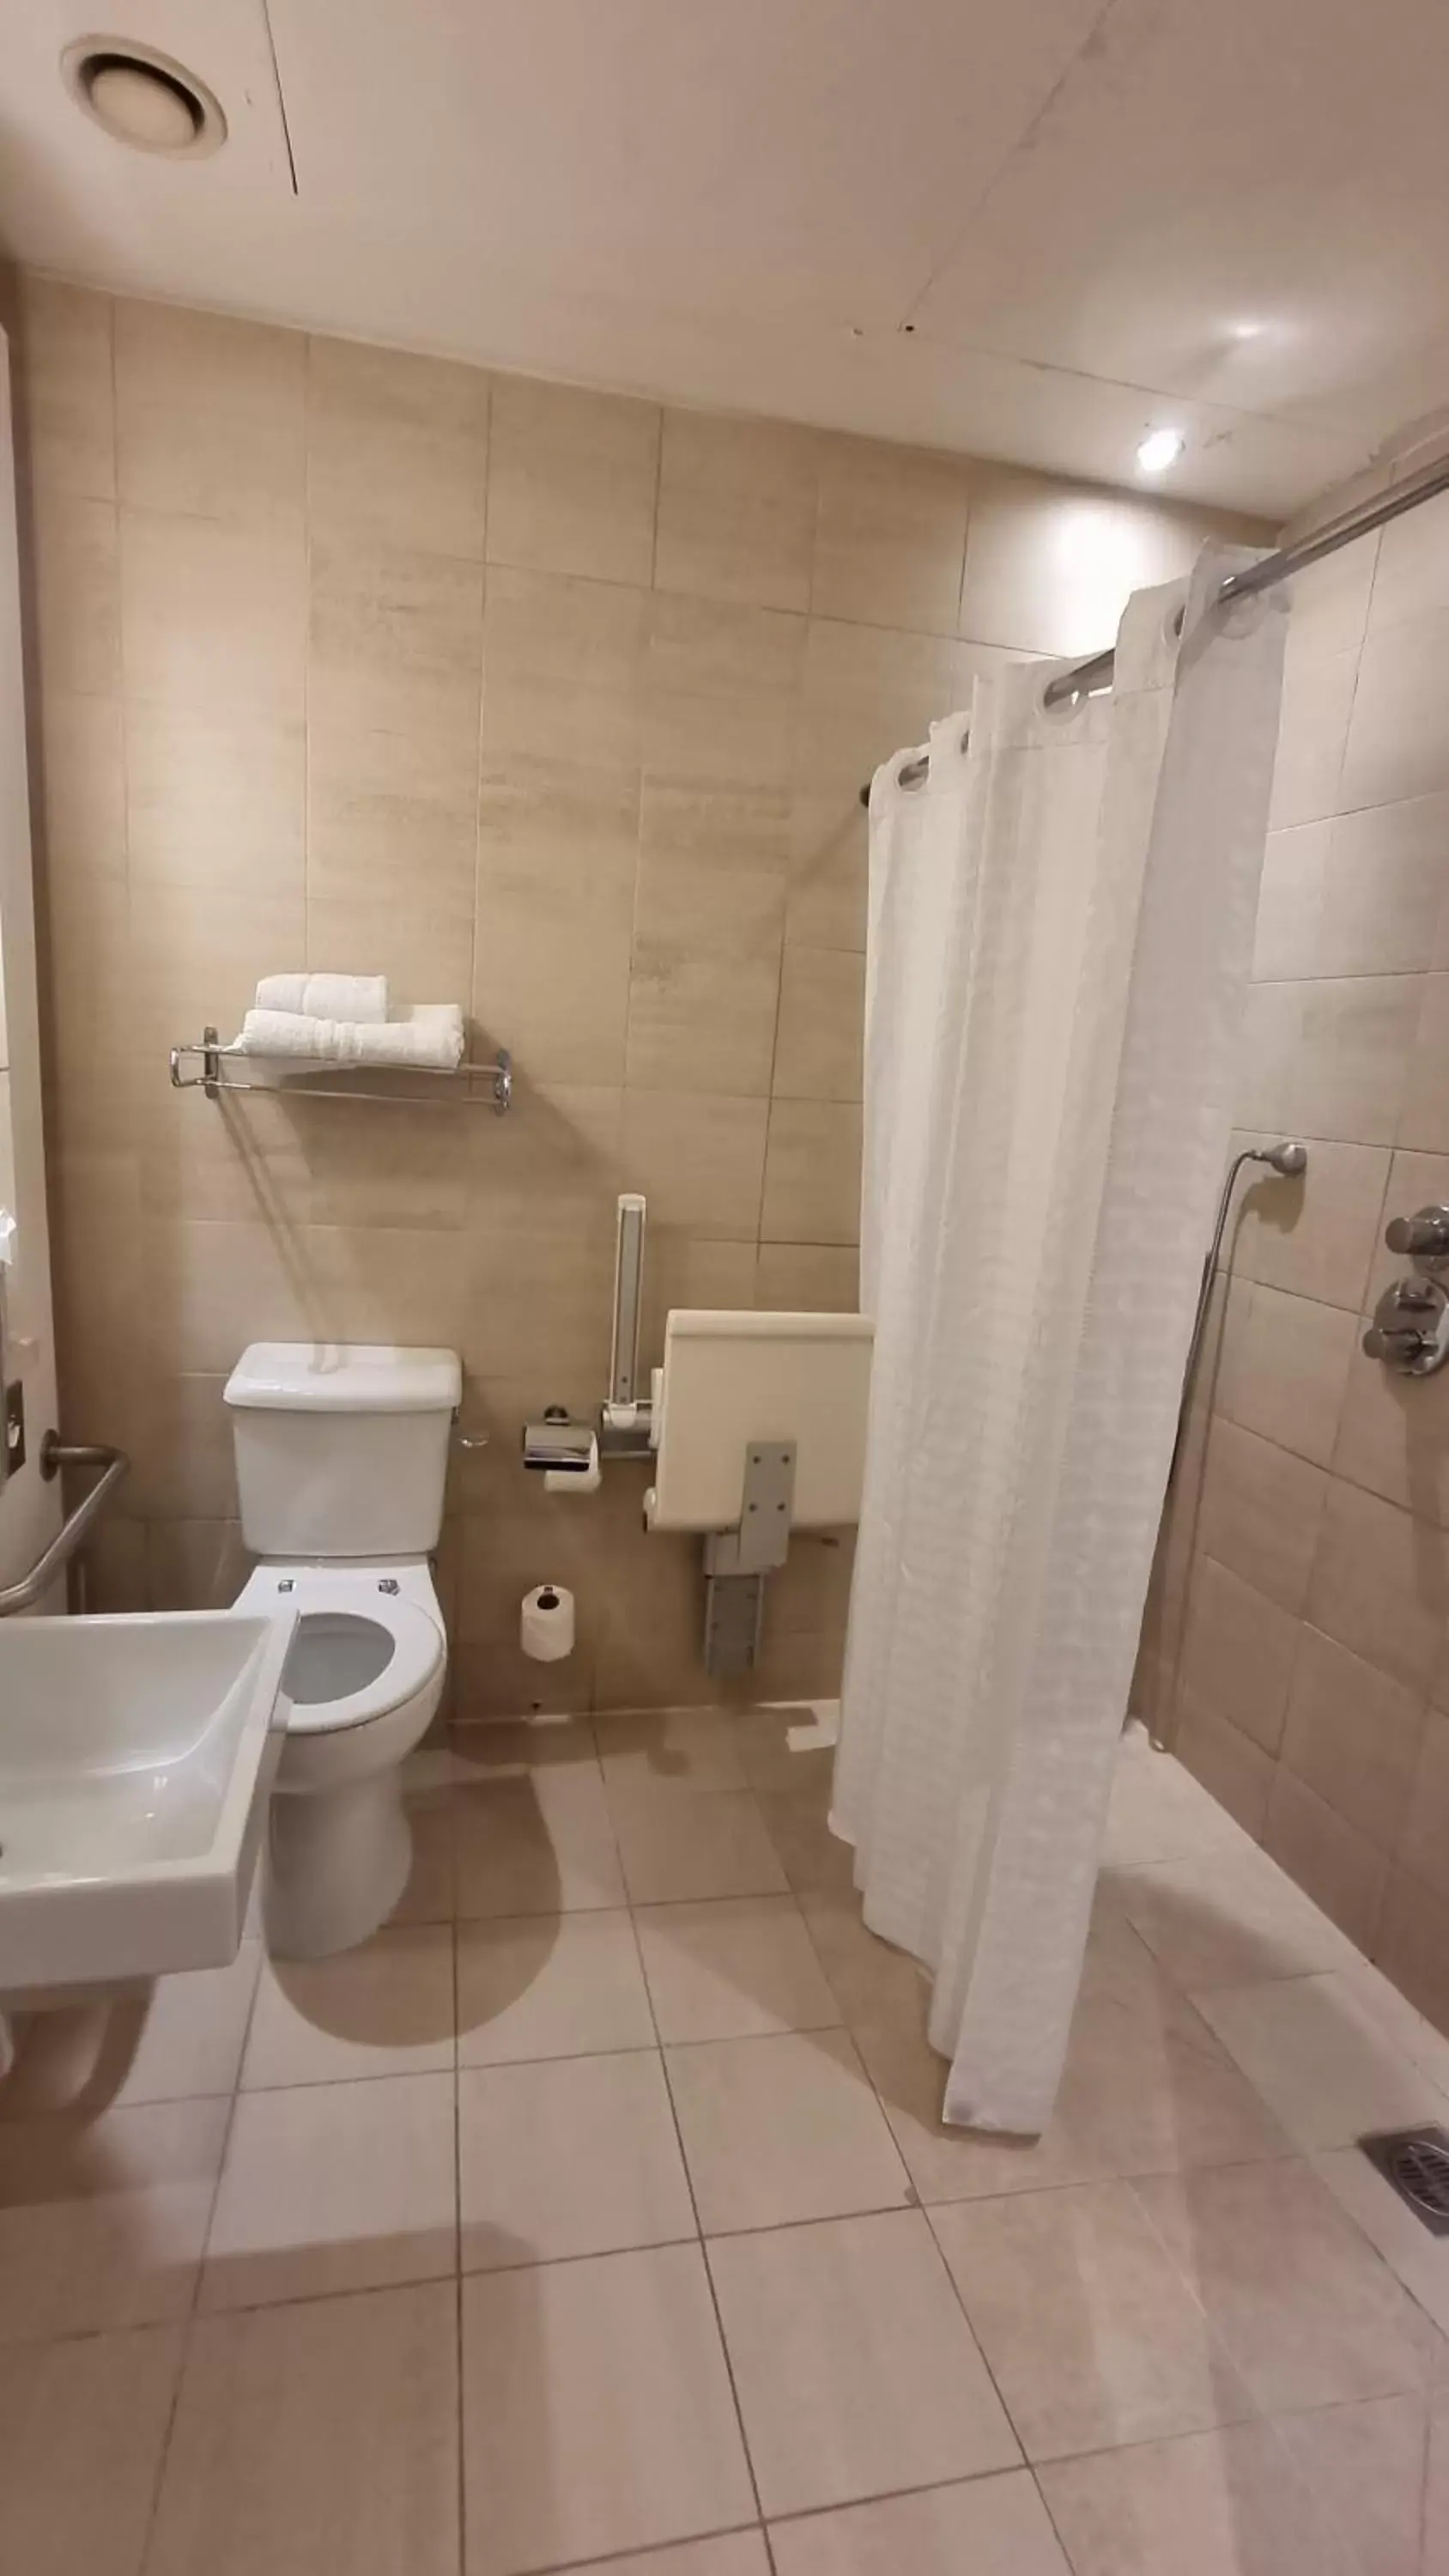 Facility for disabled guests, Bathroom in The Park City Grand Plaza Kensington Hotel